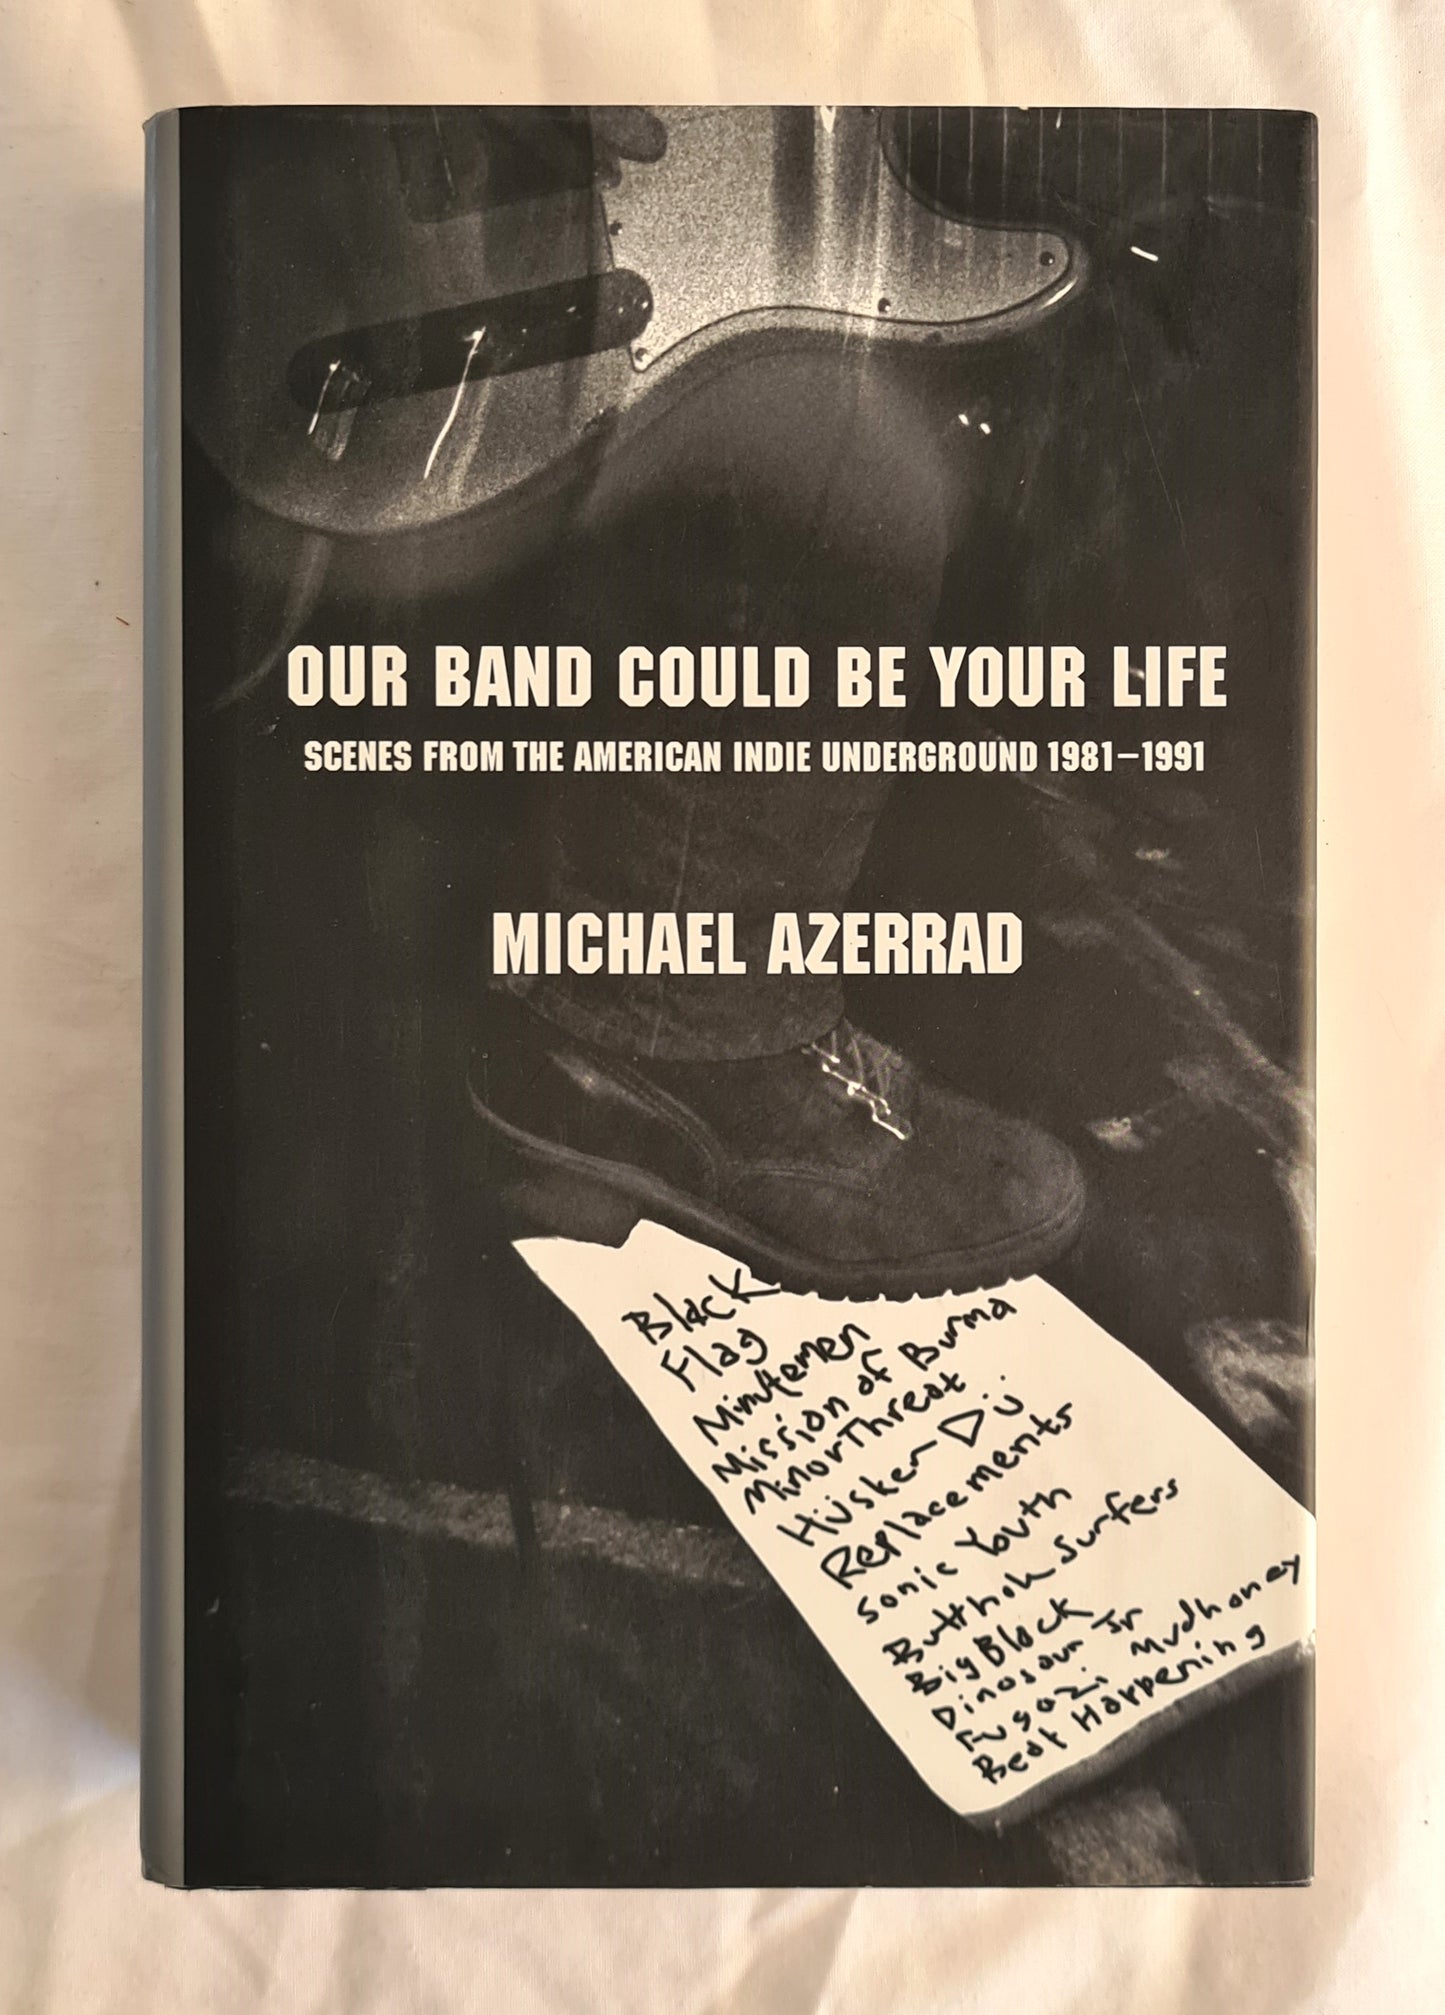 Our Band Could Be Your Life  Scenes from the American Indie Underground 1981-1991  by Michael Azerrad